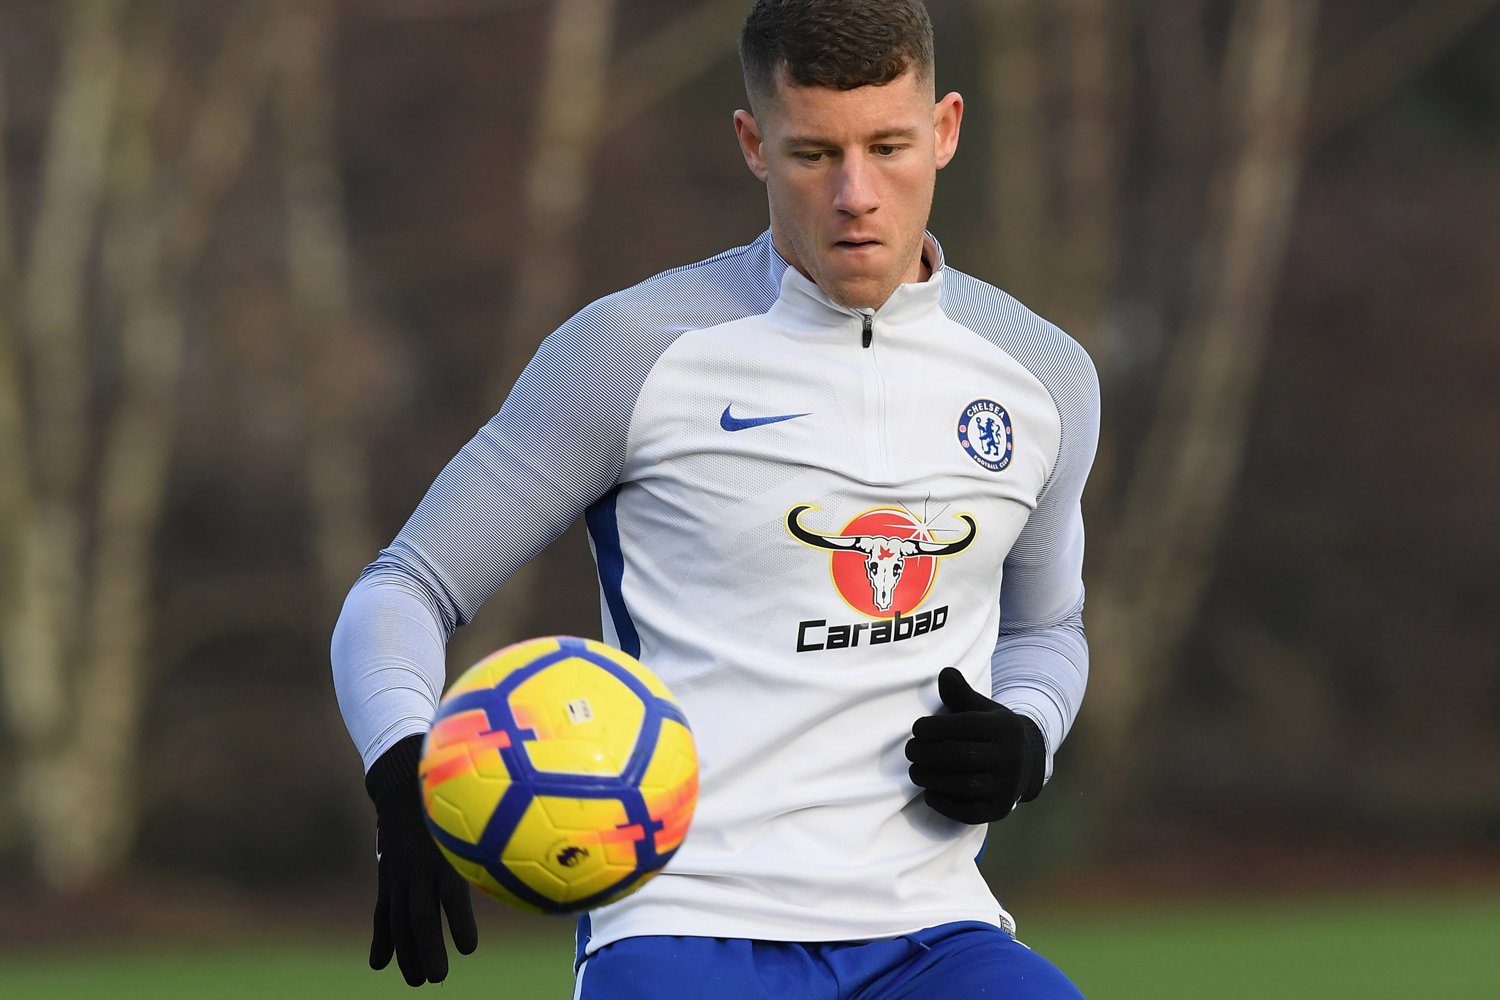 Ross Barkley has struggled for consistency at Chelsea